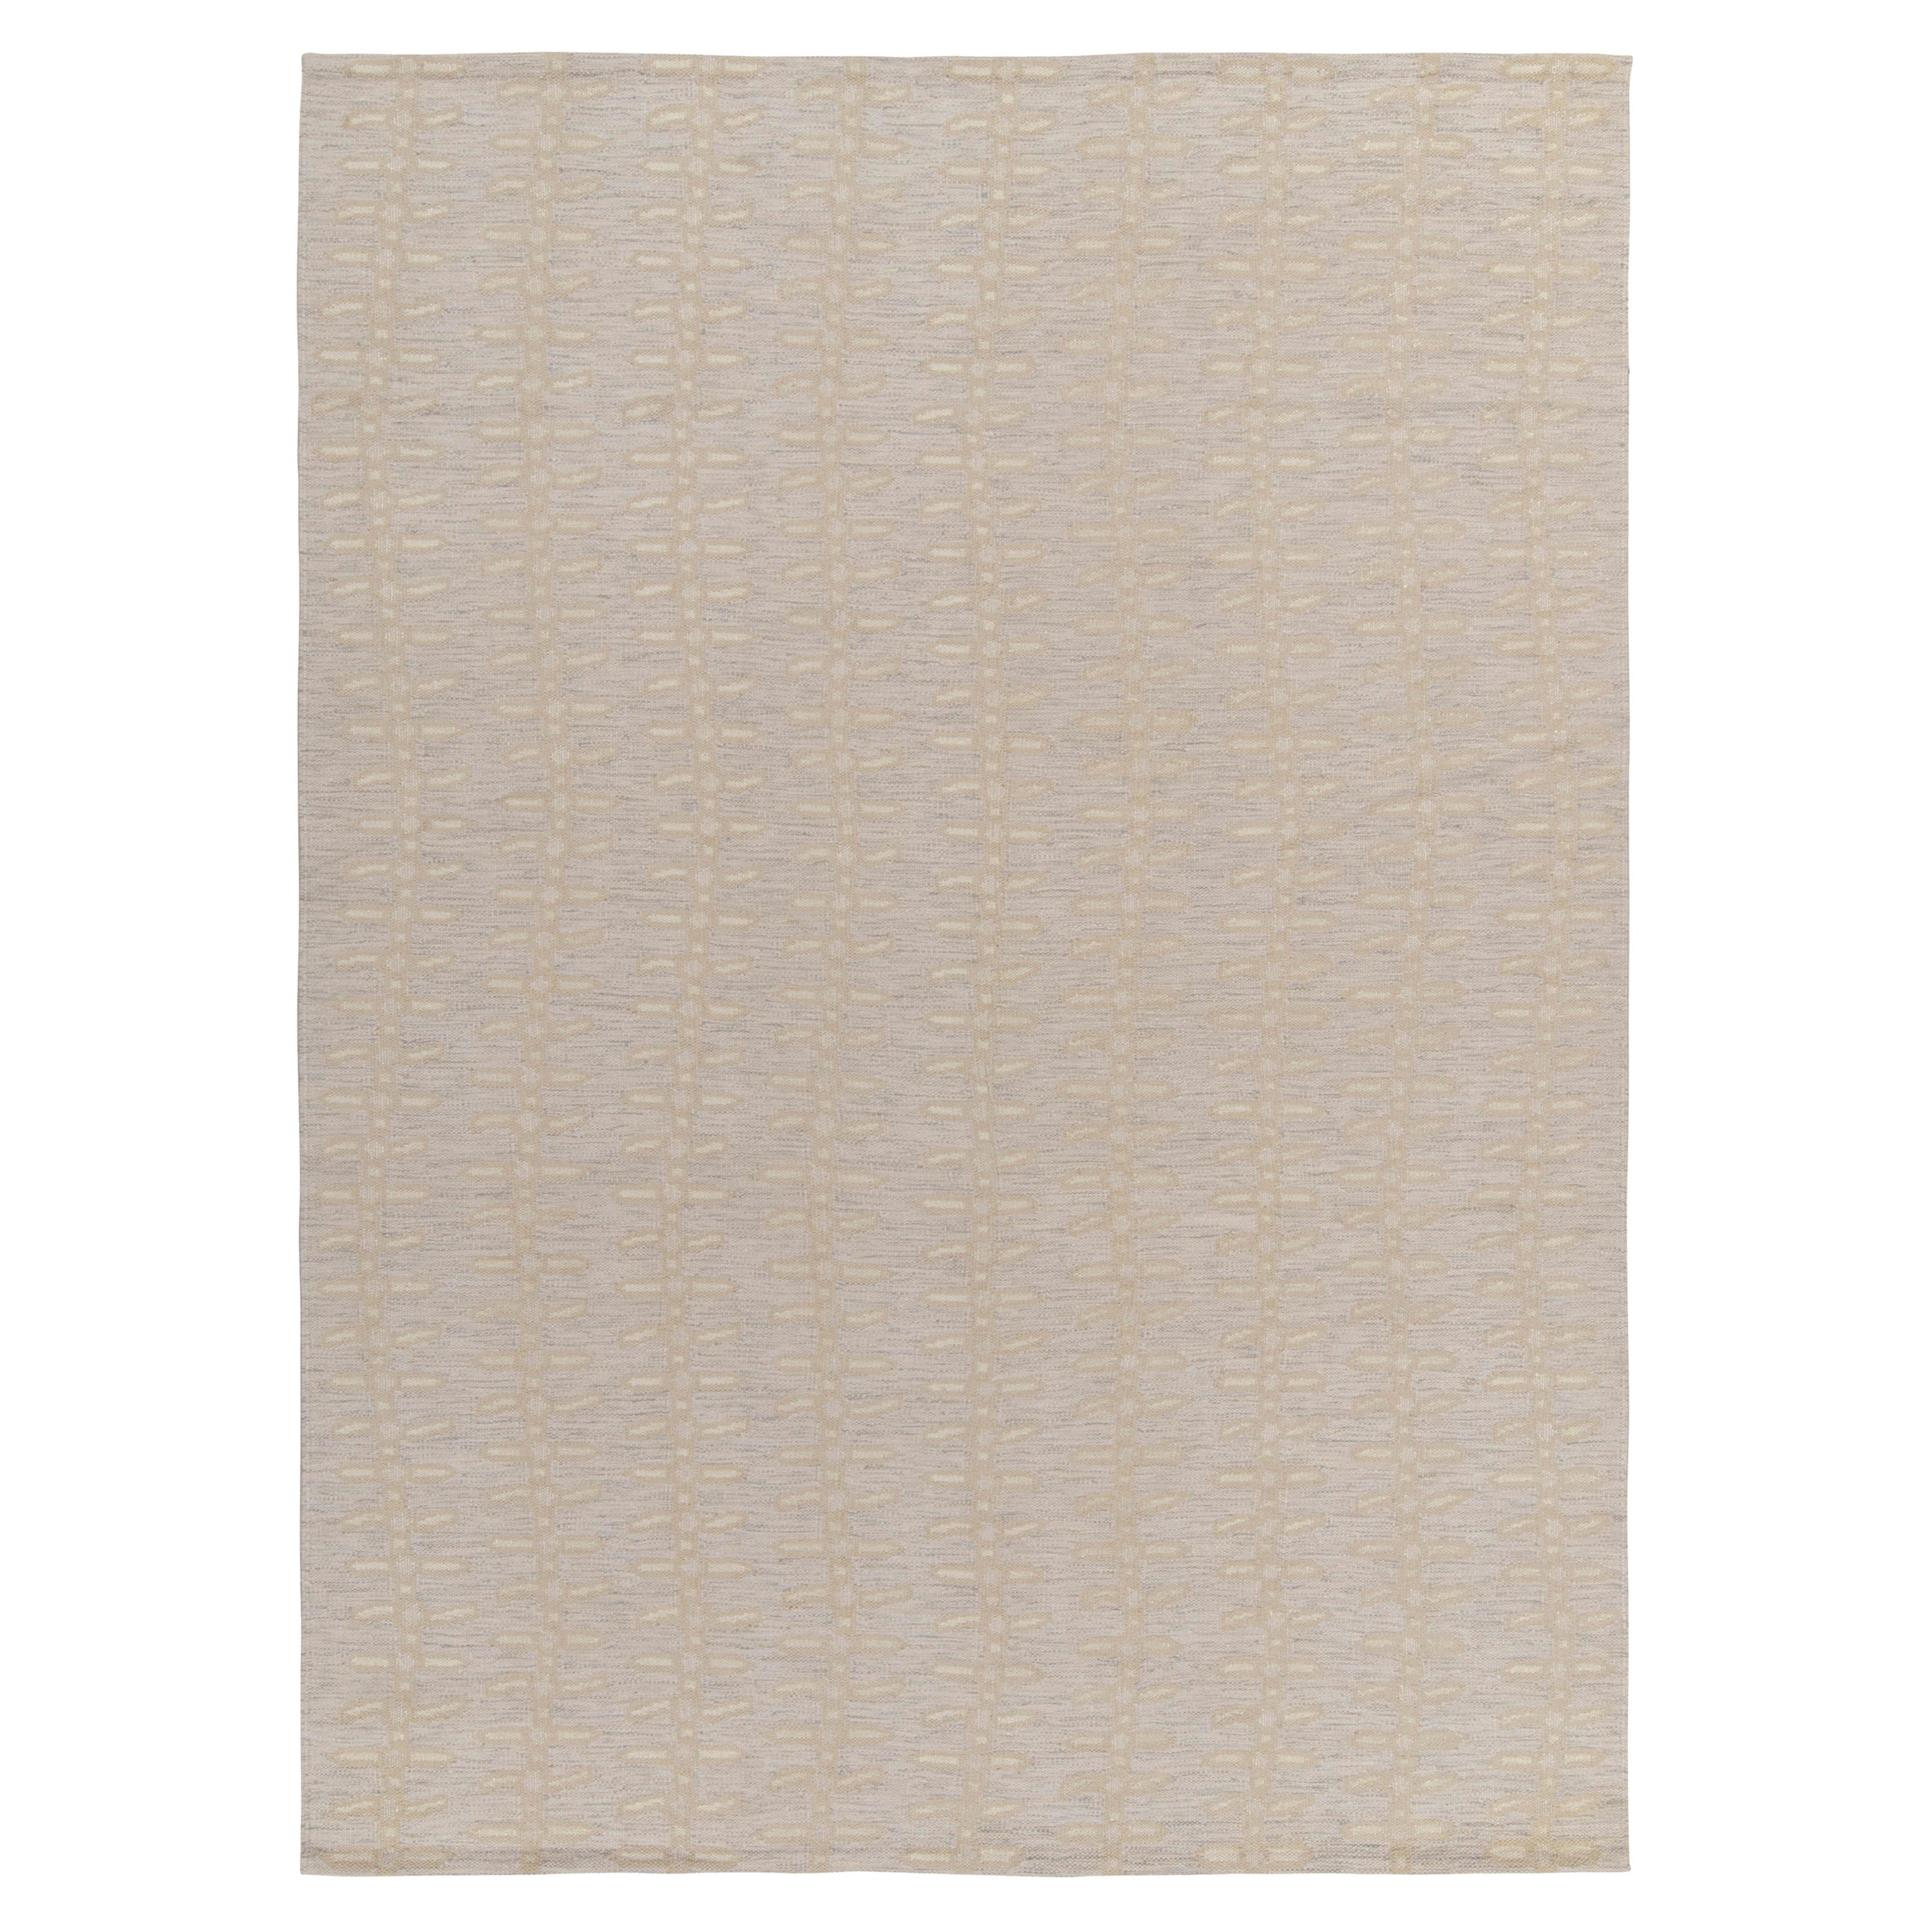 Rug & Kilim’s Scandinavian Style Kilim in Off-White, Grey and Beige Patterns